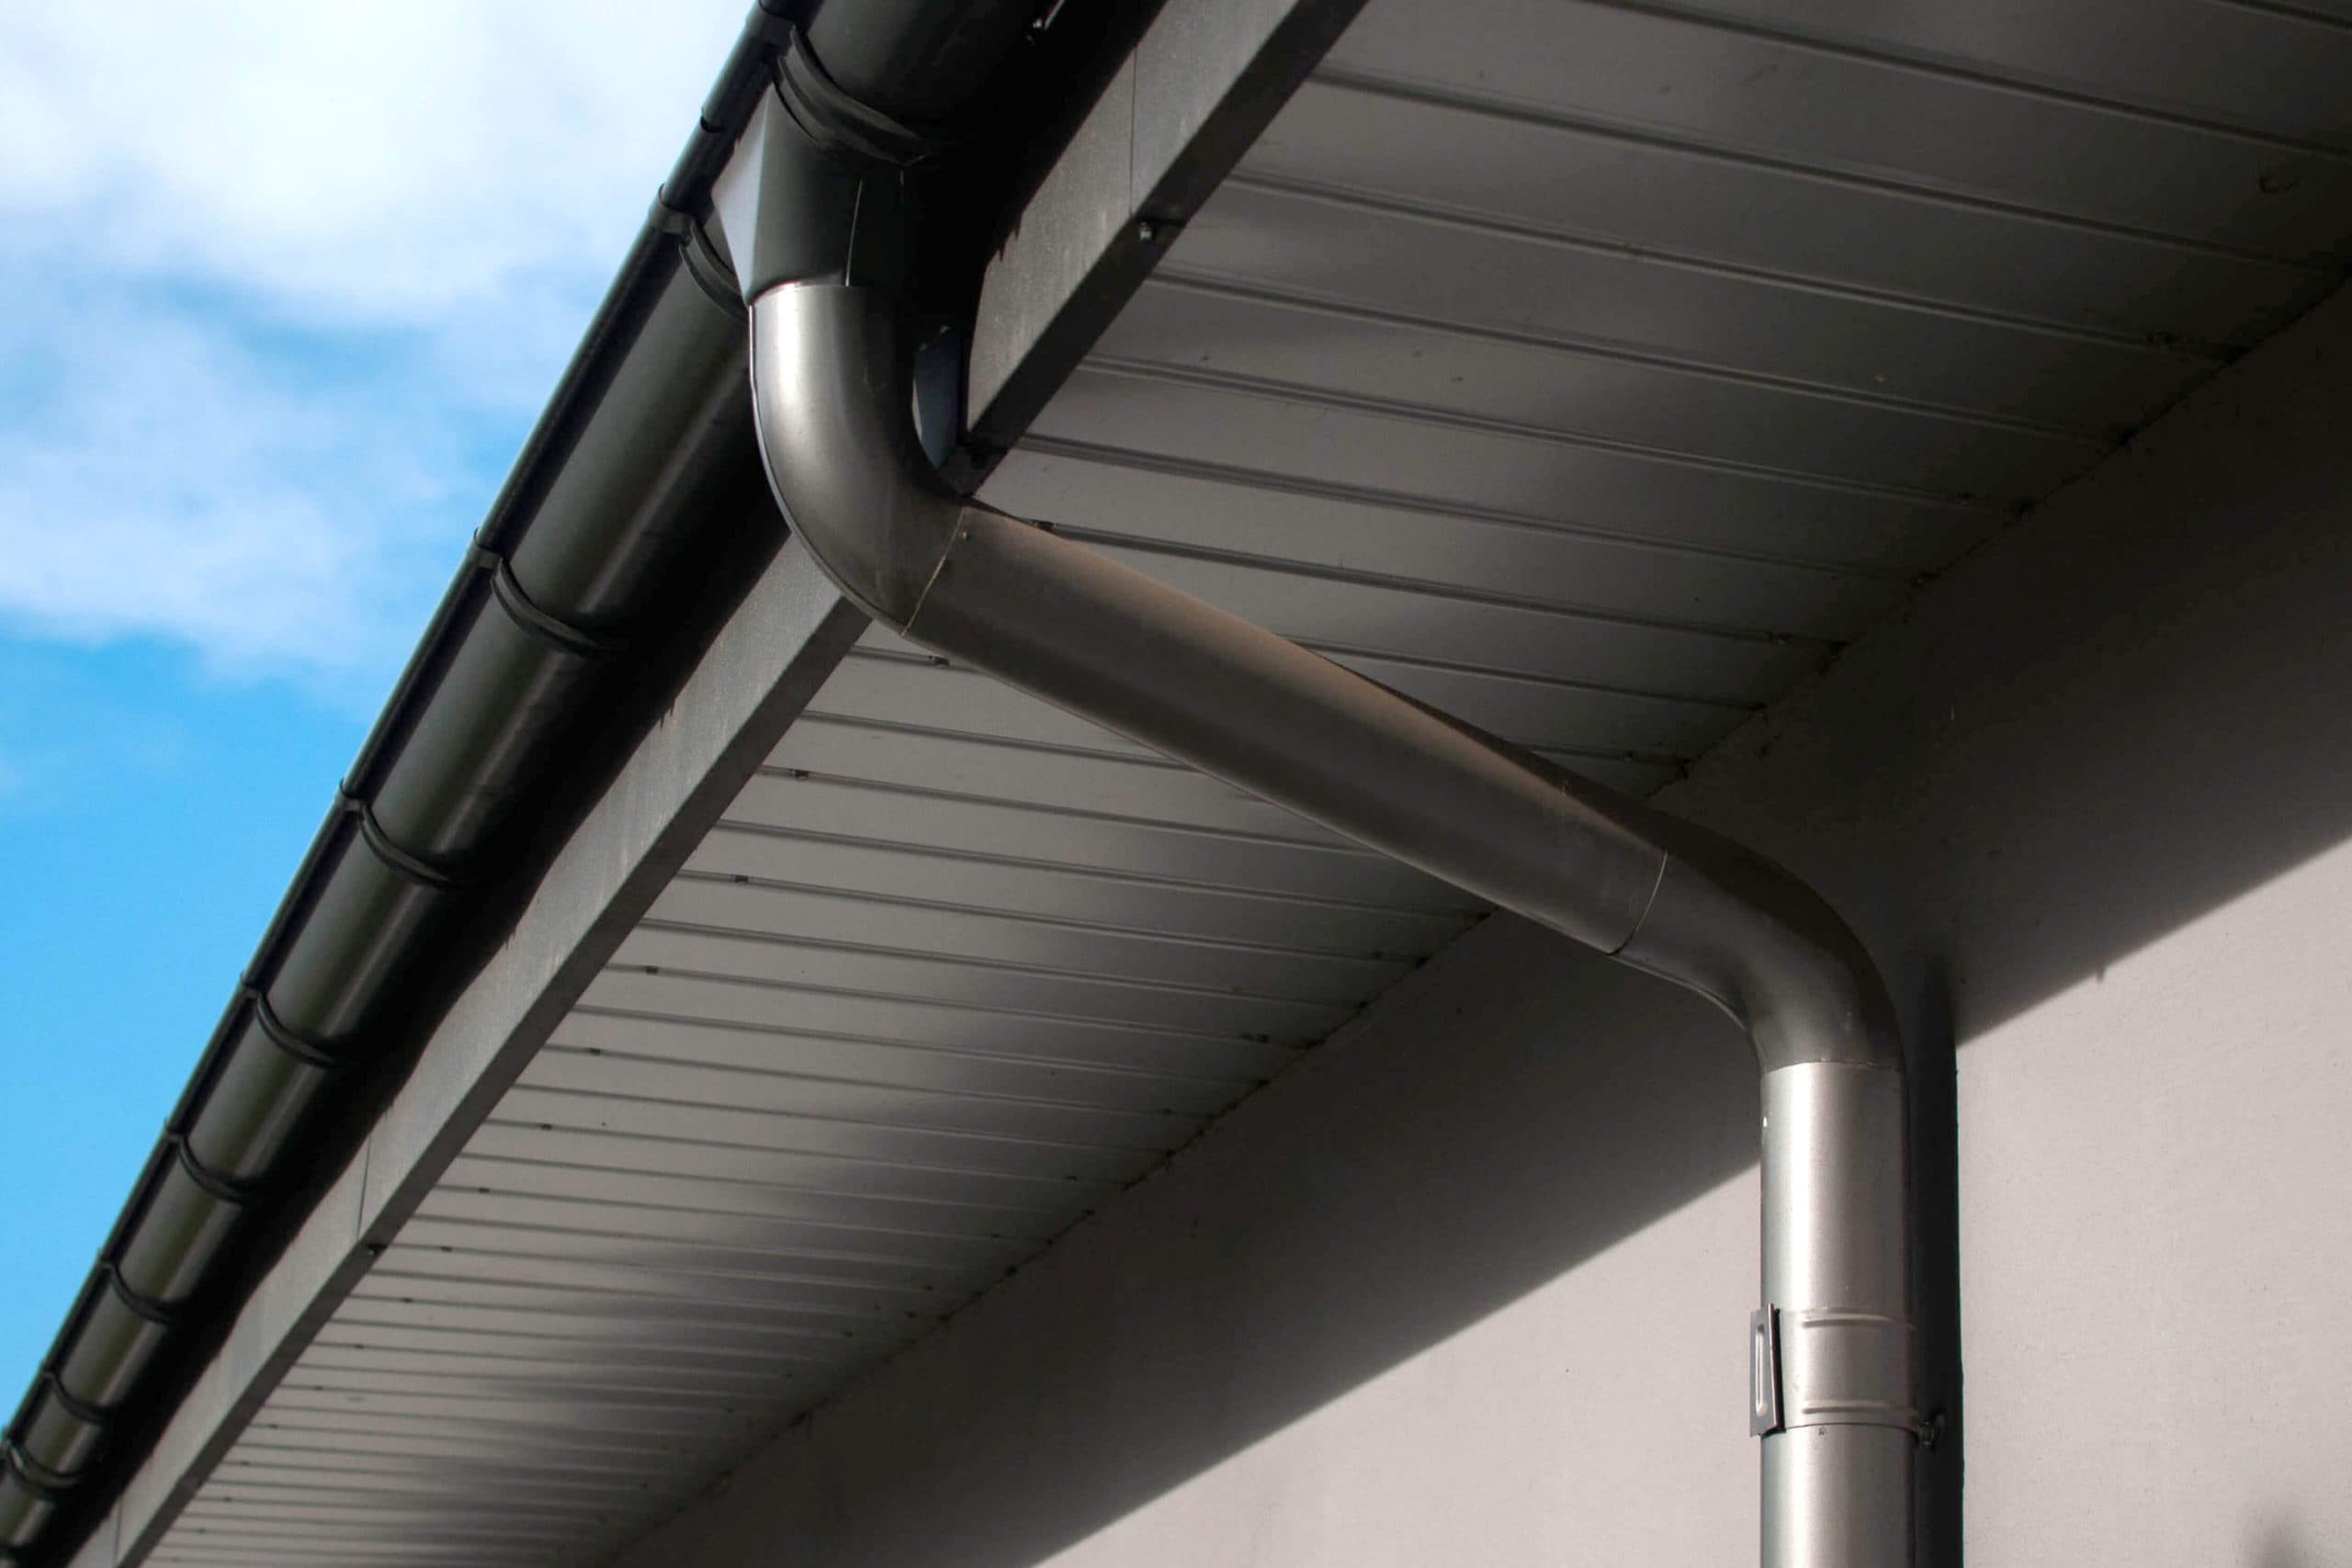 Reliable and affordable Galvanized gutters installation in Sacramento